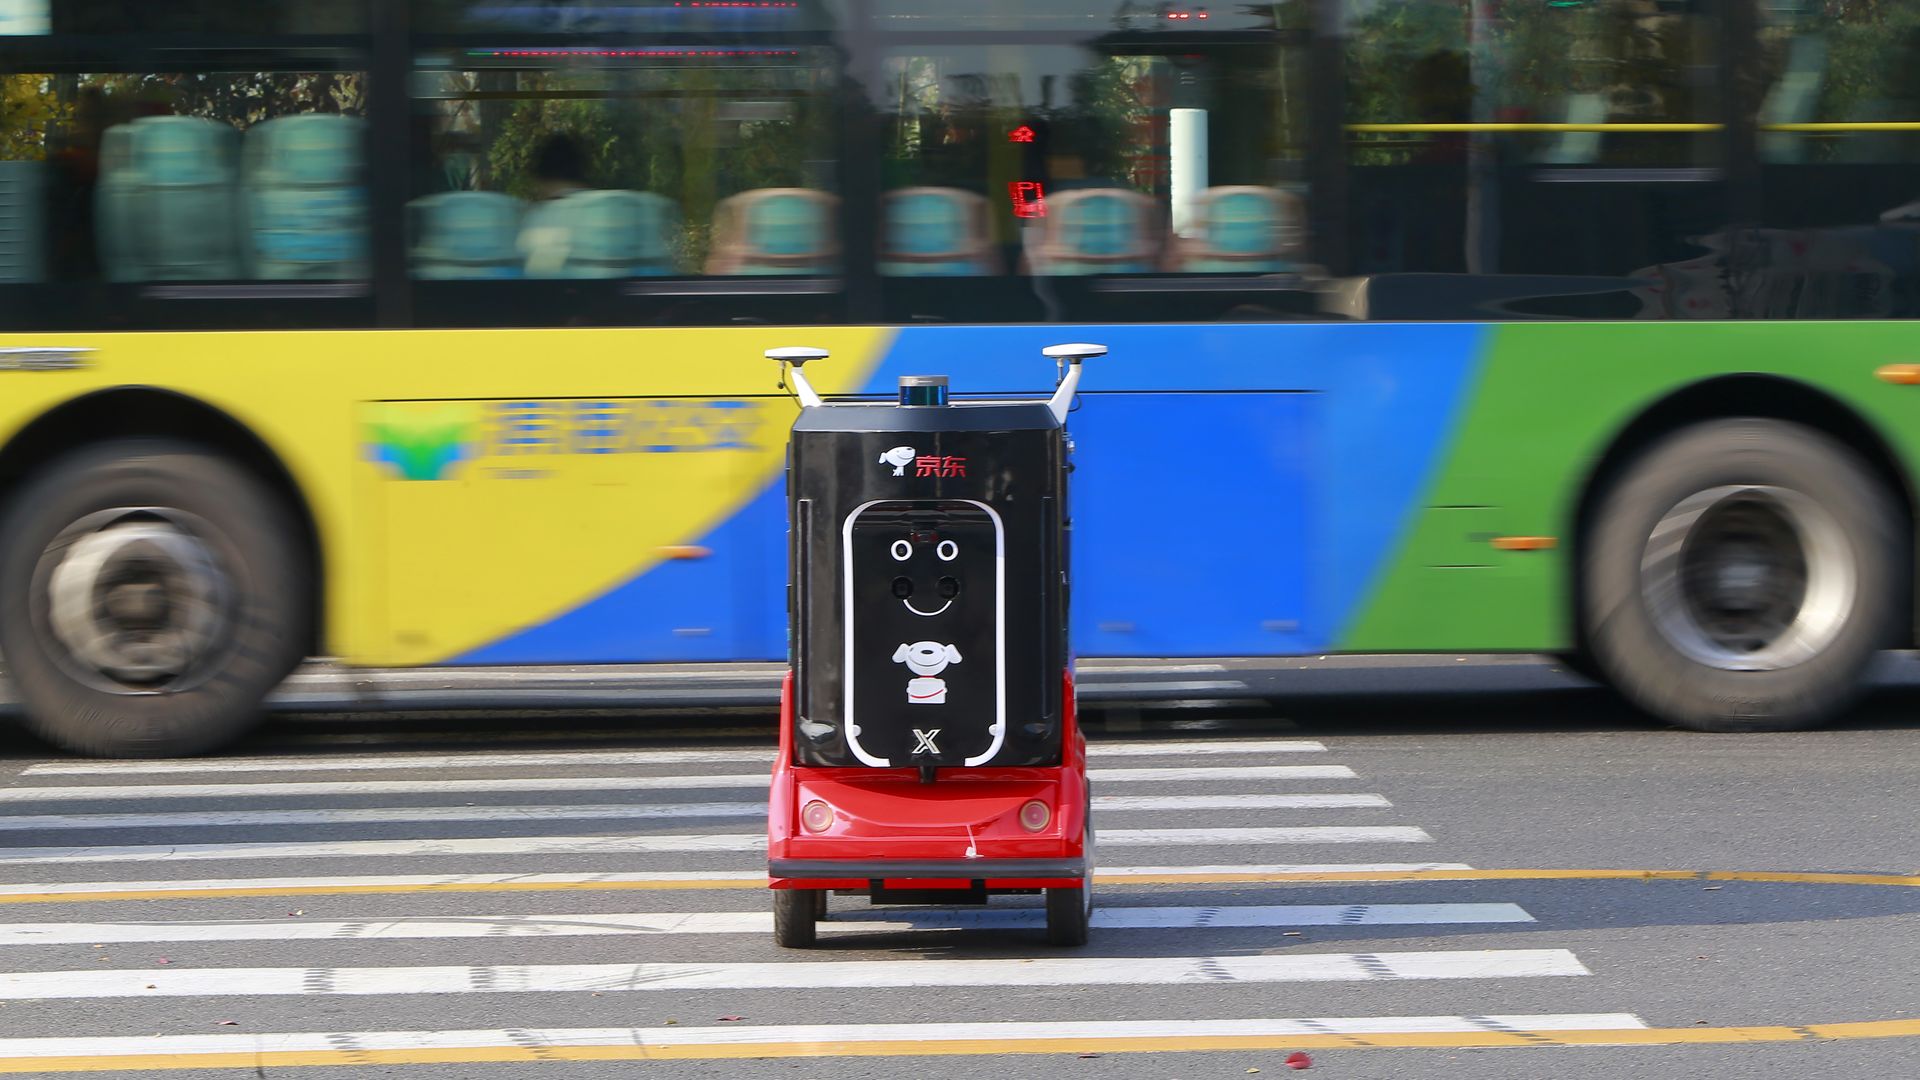 A red and black robot with a smiley face rolls across the street